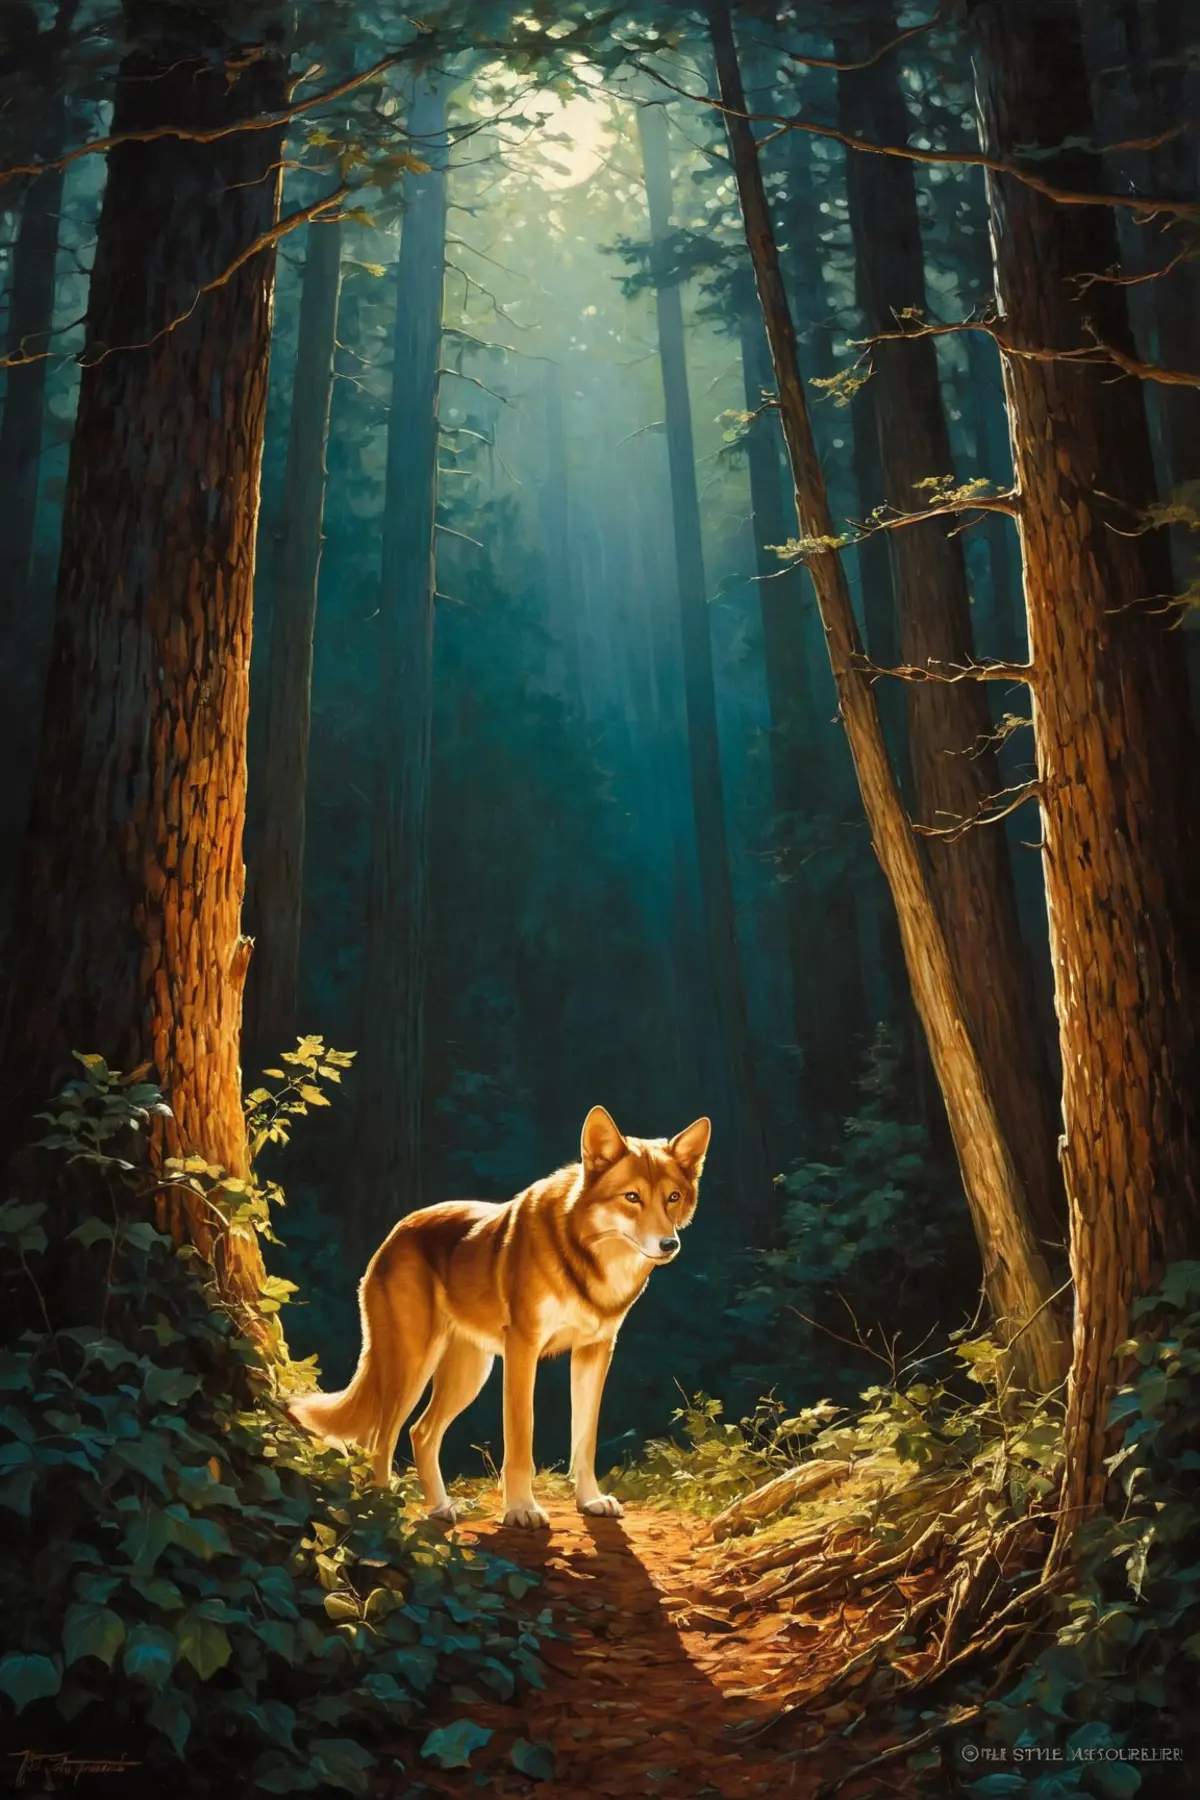 A coyote standing in the center of a forest path bathed in golden beams of sunlight. 